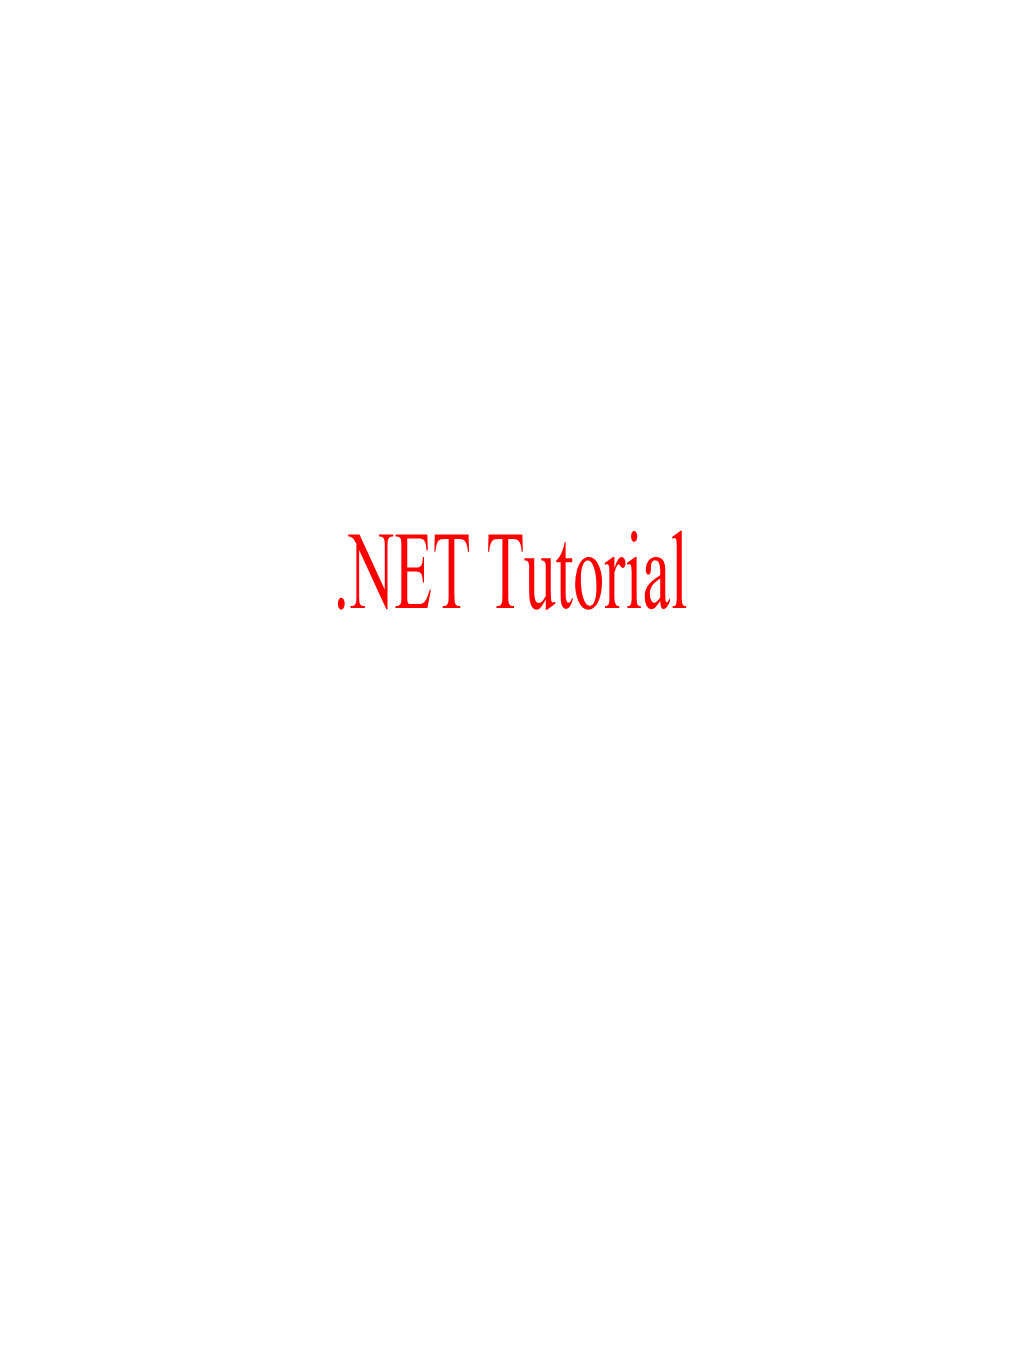 NET Tutorial Microsoft .NET • .NET Is the Microsoft Web Services Strategy to Connect Information, People, Systems, and Devices Through Software